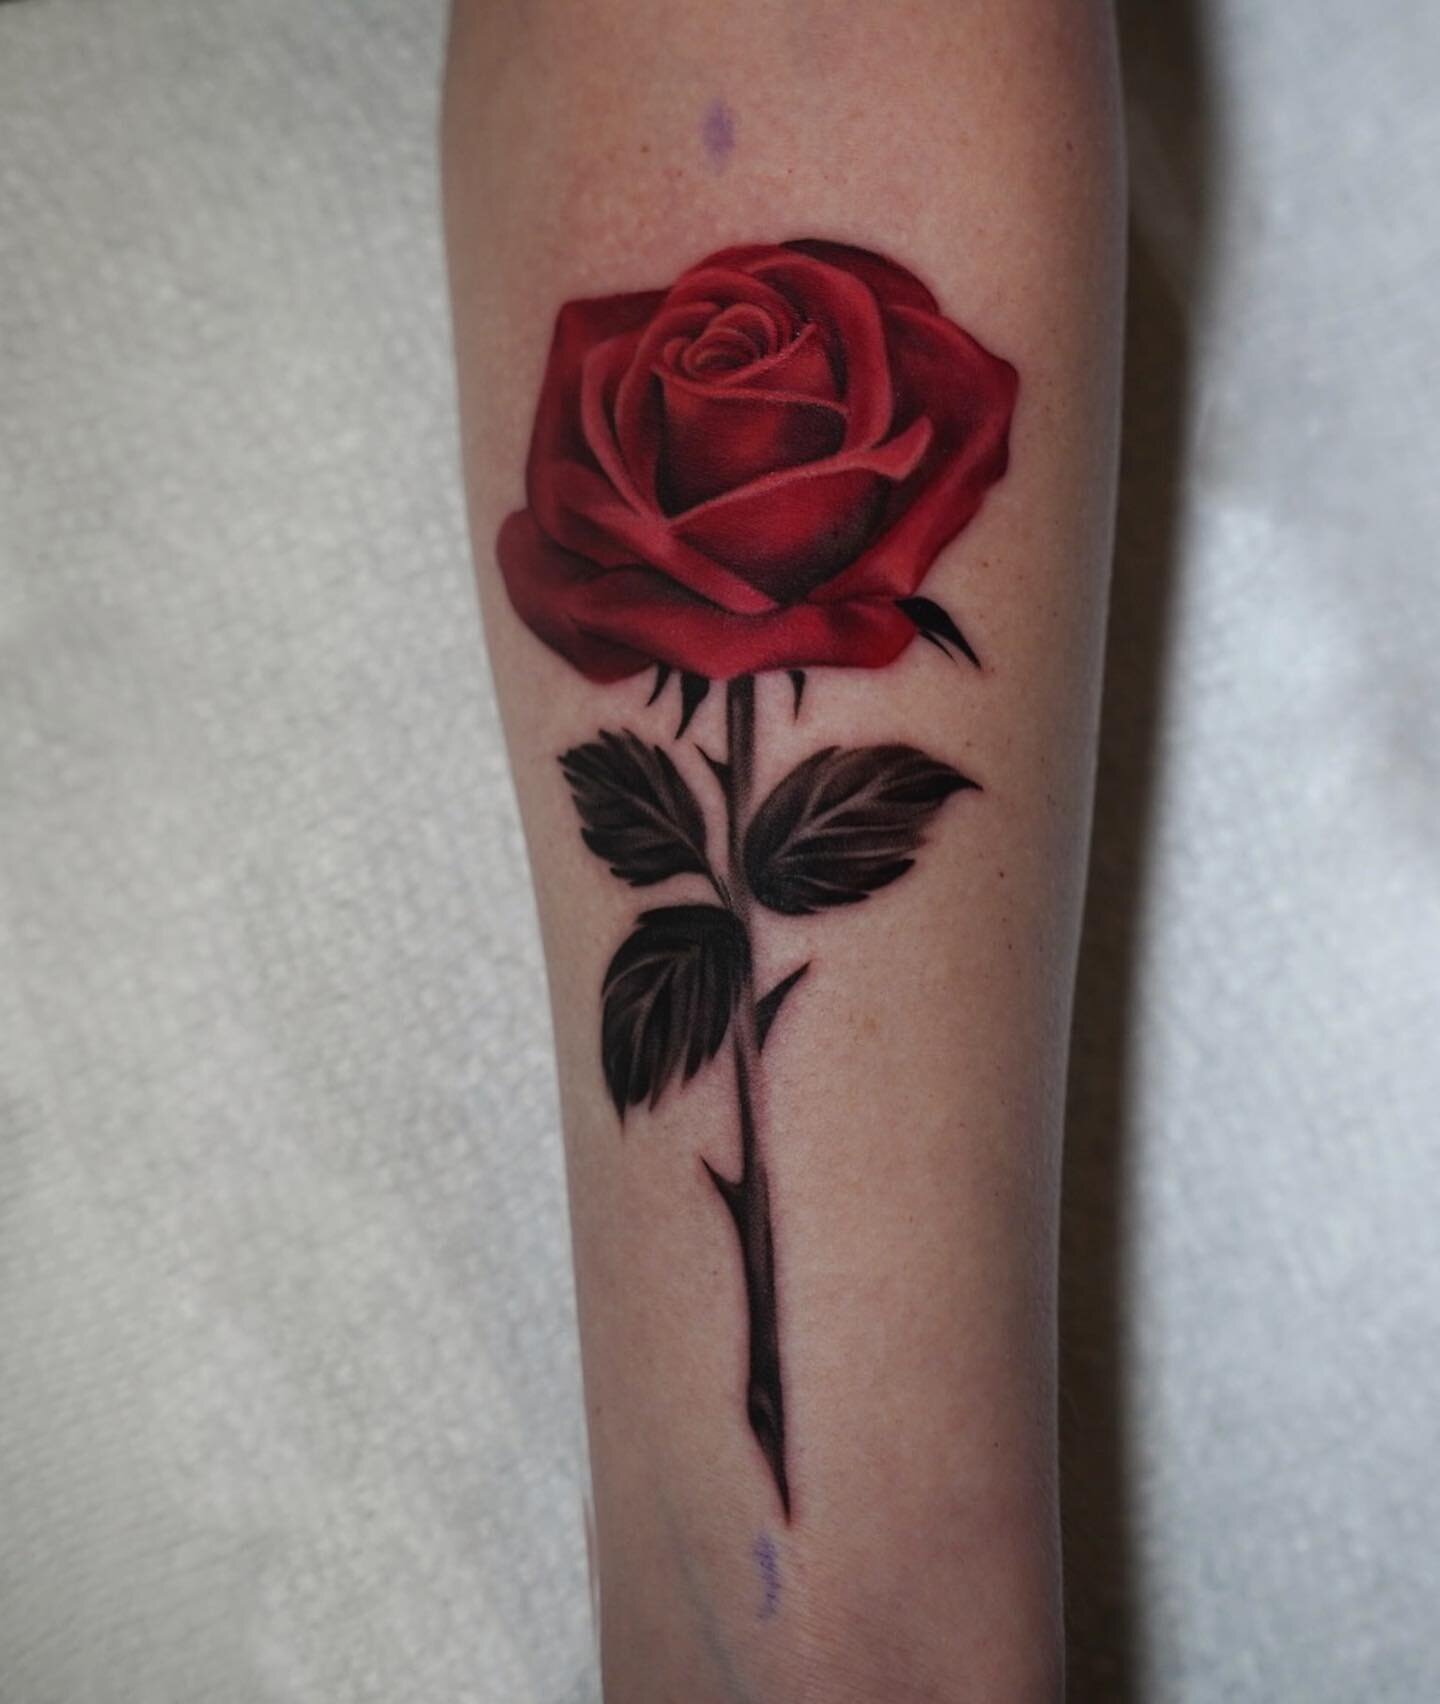 Classic single red rose 🥀🌹 Now booking for floral tattoos June-July 🥰 Booking form linked in bio ⬆️
|
|
|
|
|
#rosetattoo #redrose #colortattoo #flowertatoo #floraltattoo #thorn #armtattoo #tattooidea #tattoodesign #realismtattoo #realistictattoo 